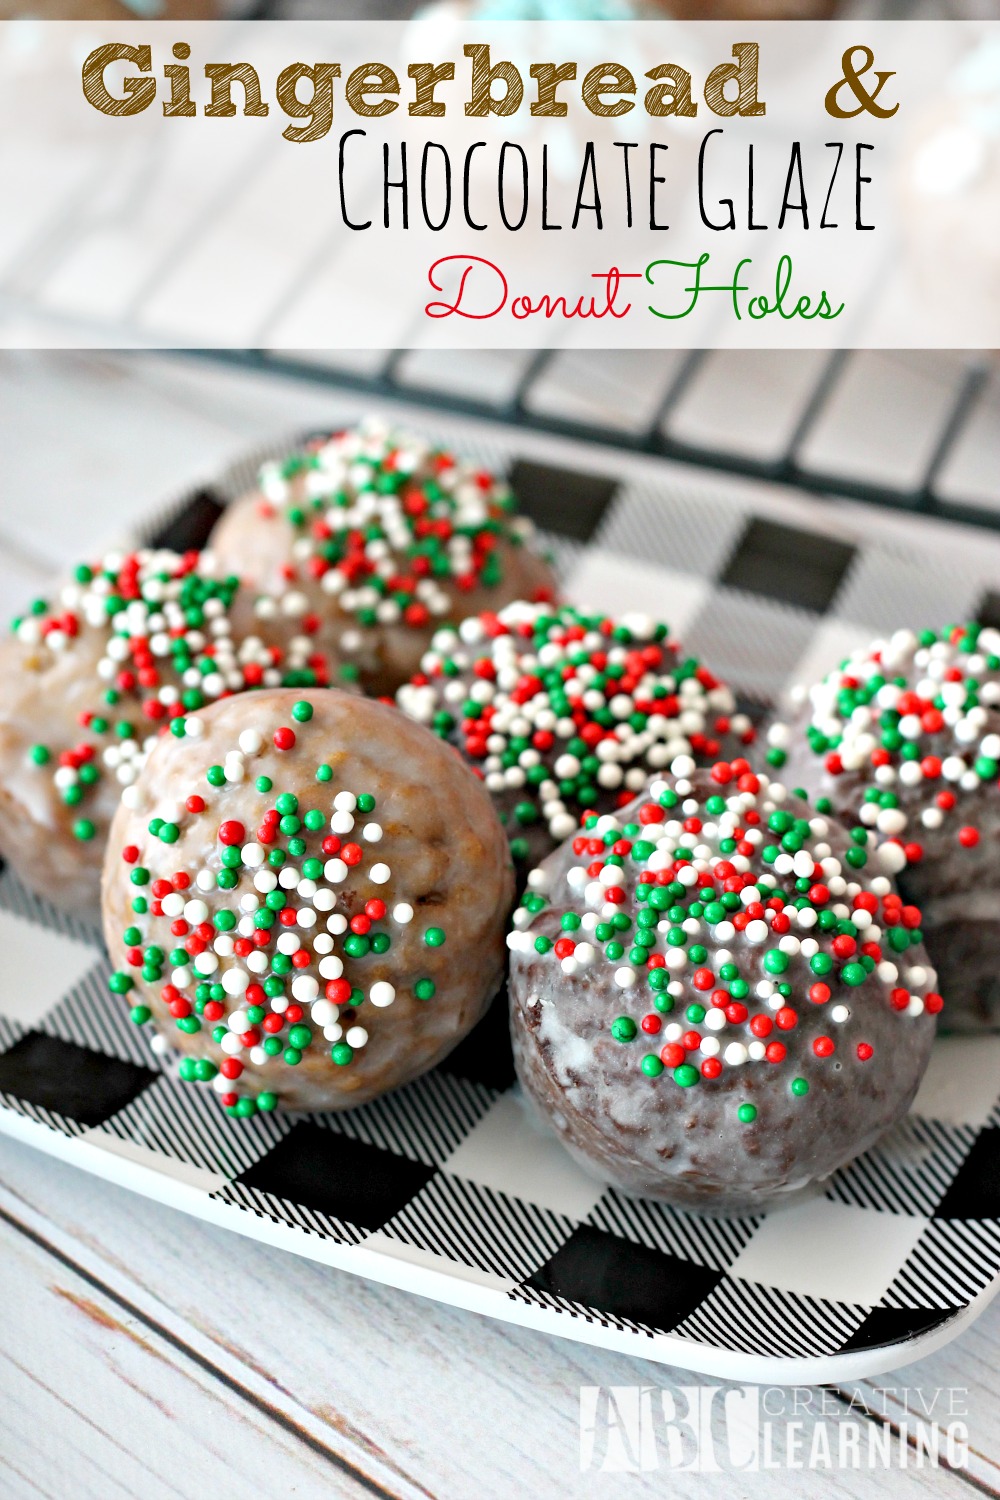 Gingerbread and Chocolate Glazed Donut Holes